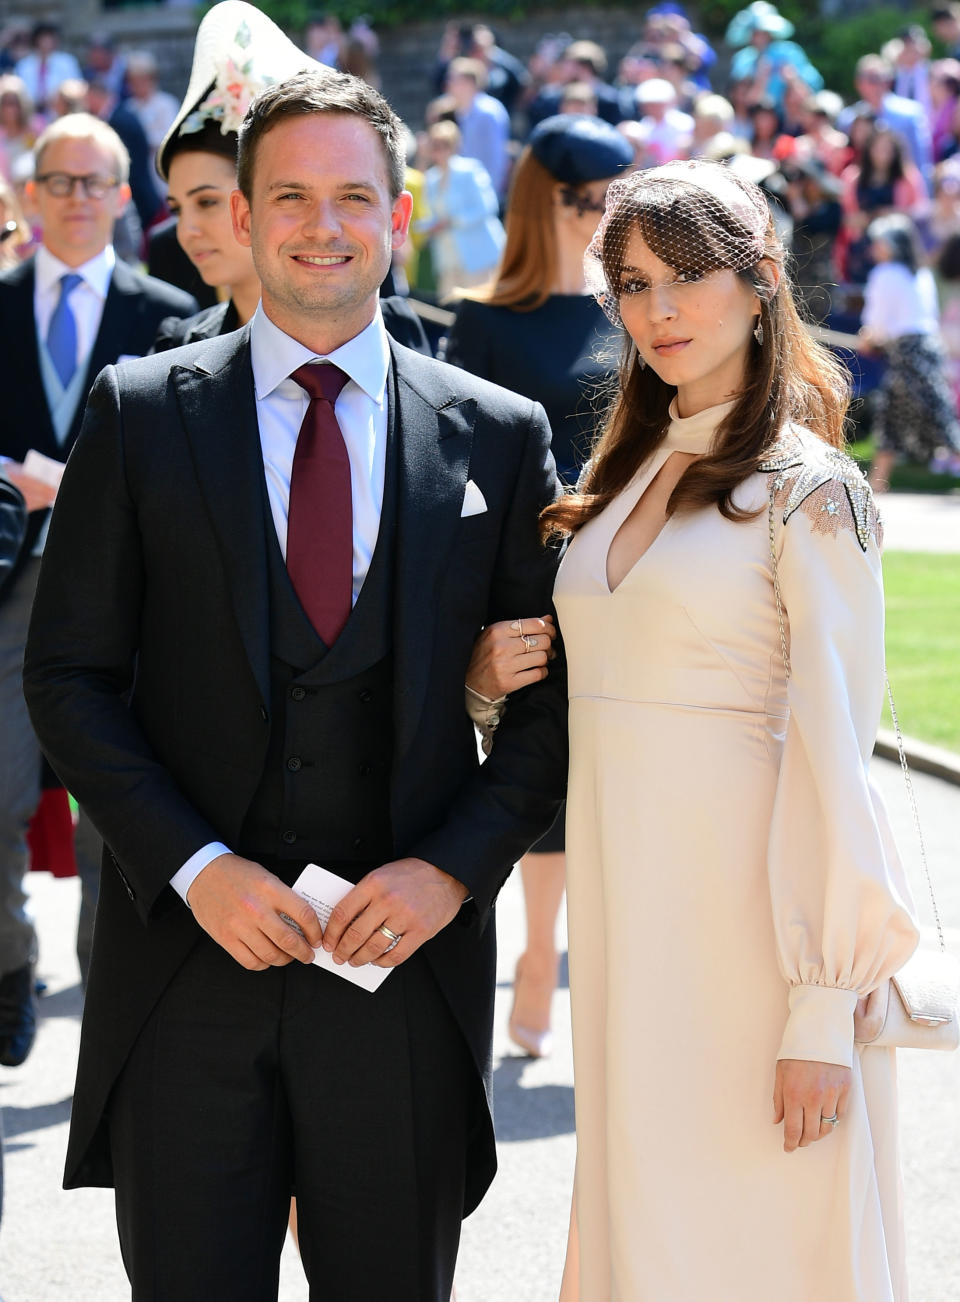 Meghan Markle's friend, US actor Patrick J. Adams and wife Troian Bellisario arrive for the wedding ceremony of Britain's Prince Harry, Duke of Sussex and US actress Meghan Markle at St George's Chapel, Windsor Castle, in Windsor, on May 19, 2018. (Photo by Ian WEST / POOL / AFP)        (Photo credit should read IAN WEST/AFP via Getty Images)